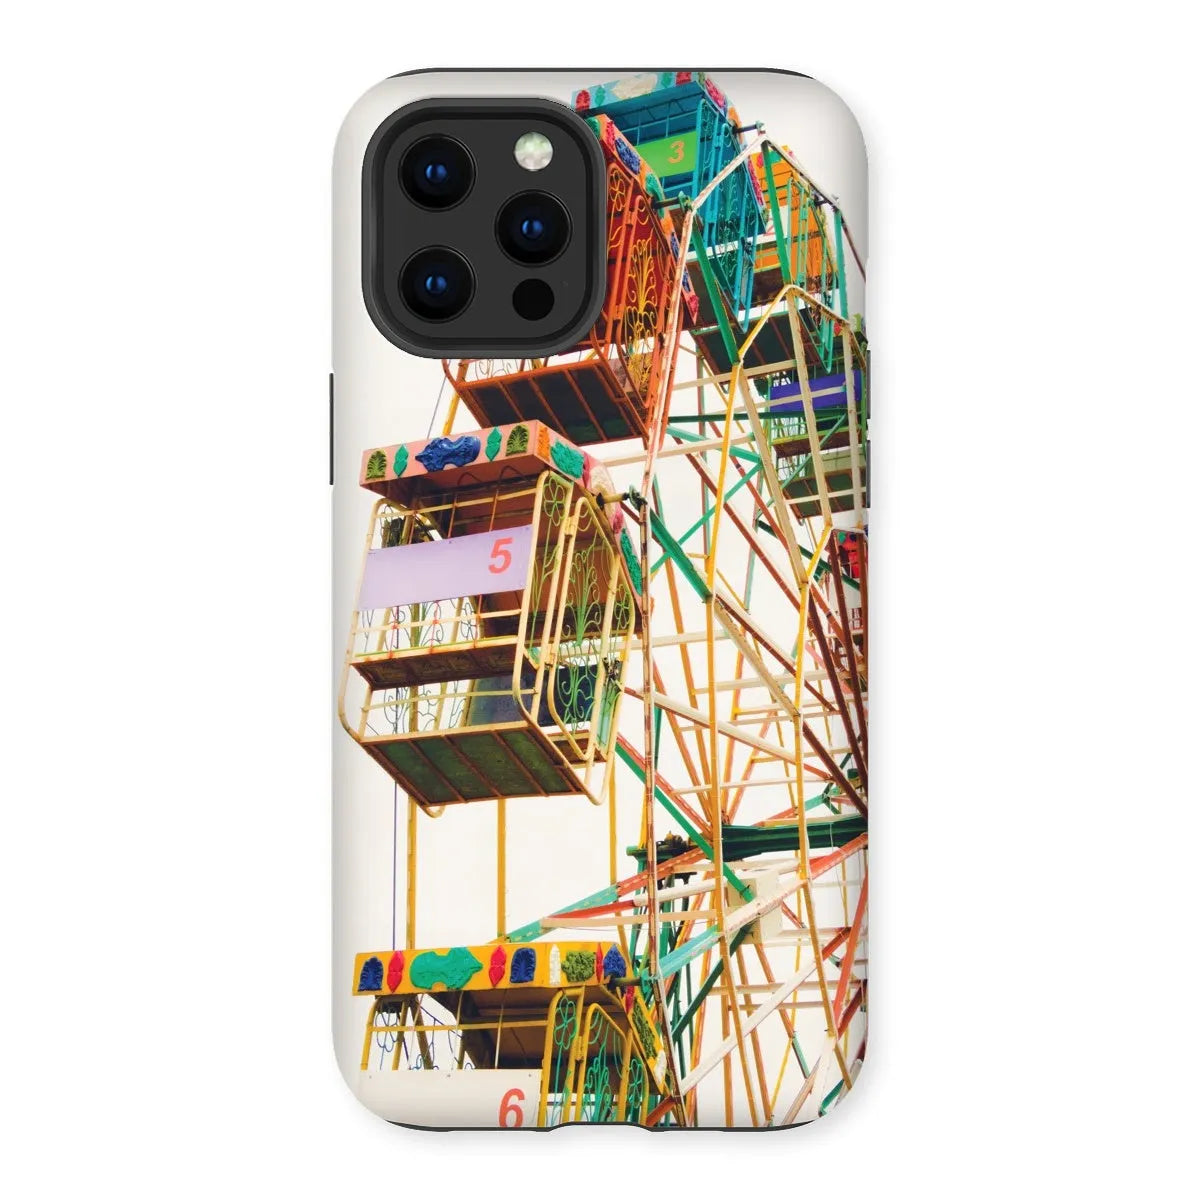 Wheel Of Fortune Tough Phone Case - Iphone 12 Pro Max / Matte - Mobile Phone Cases - Aesthetic Art